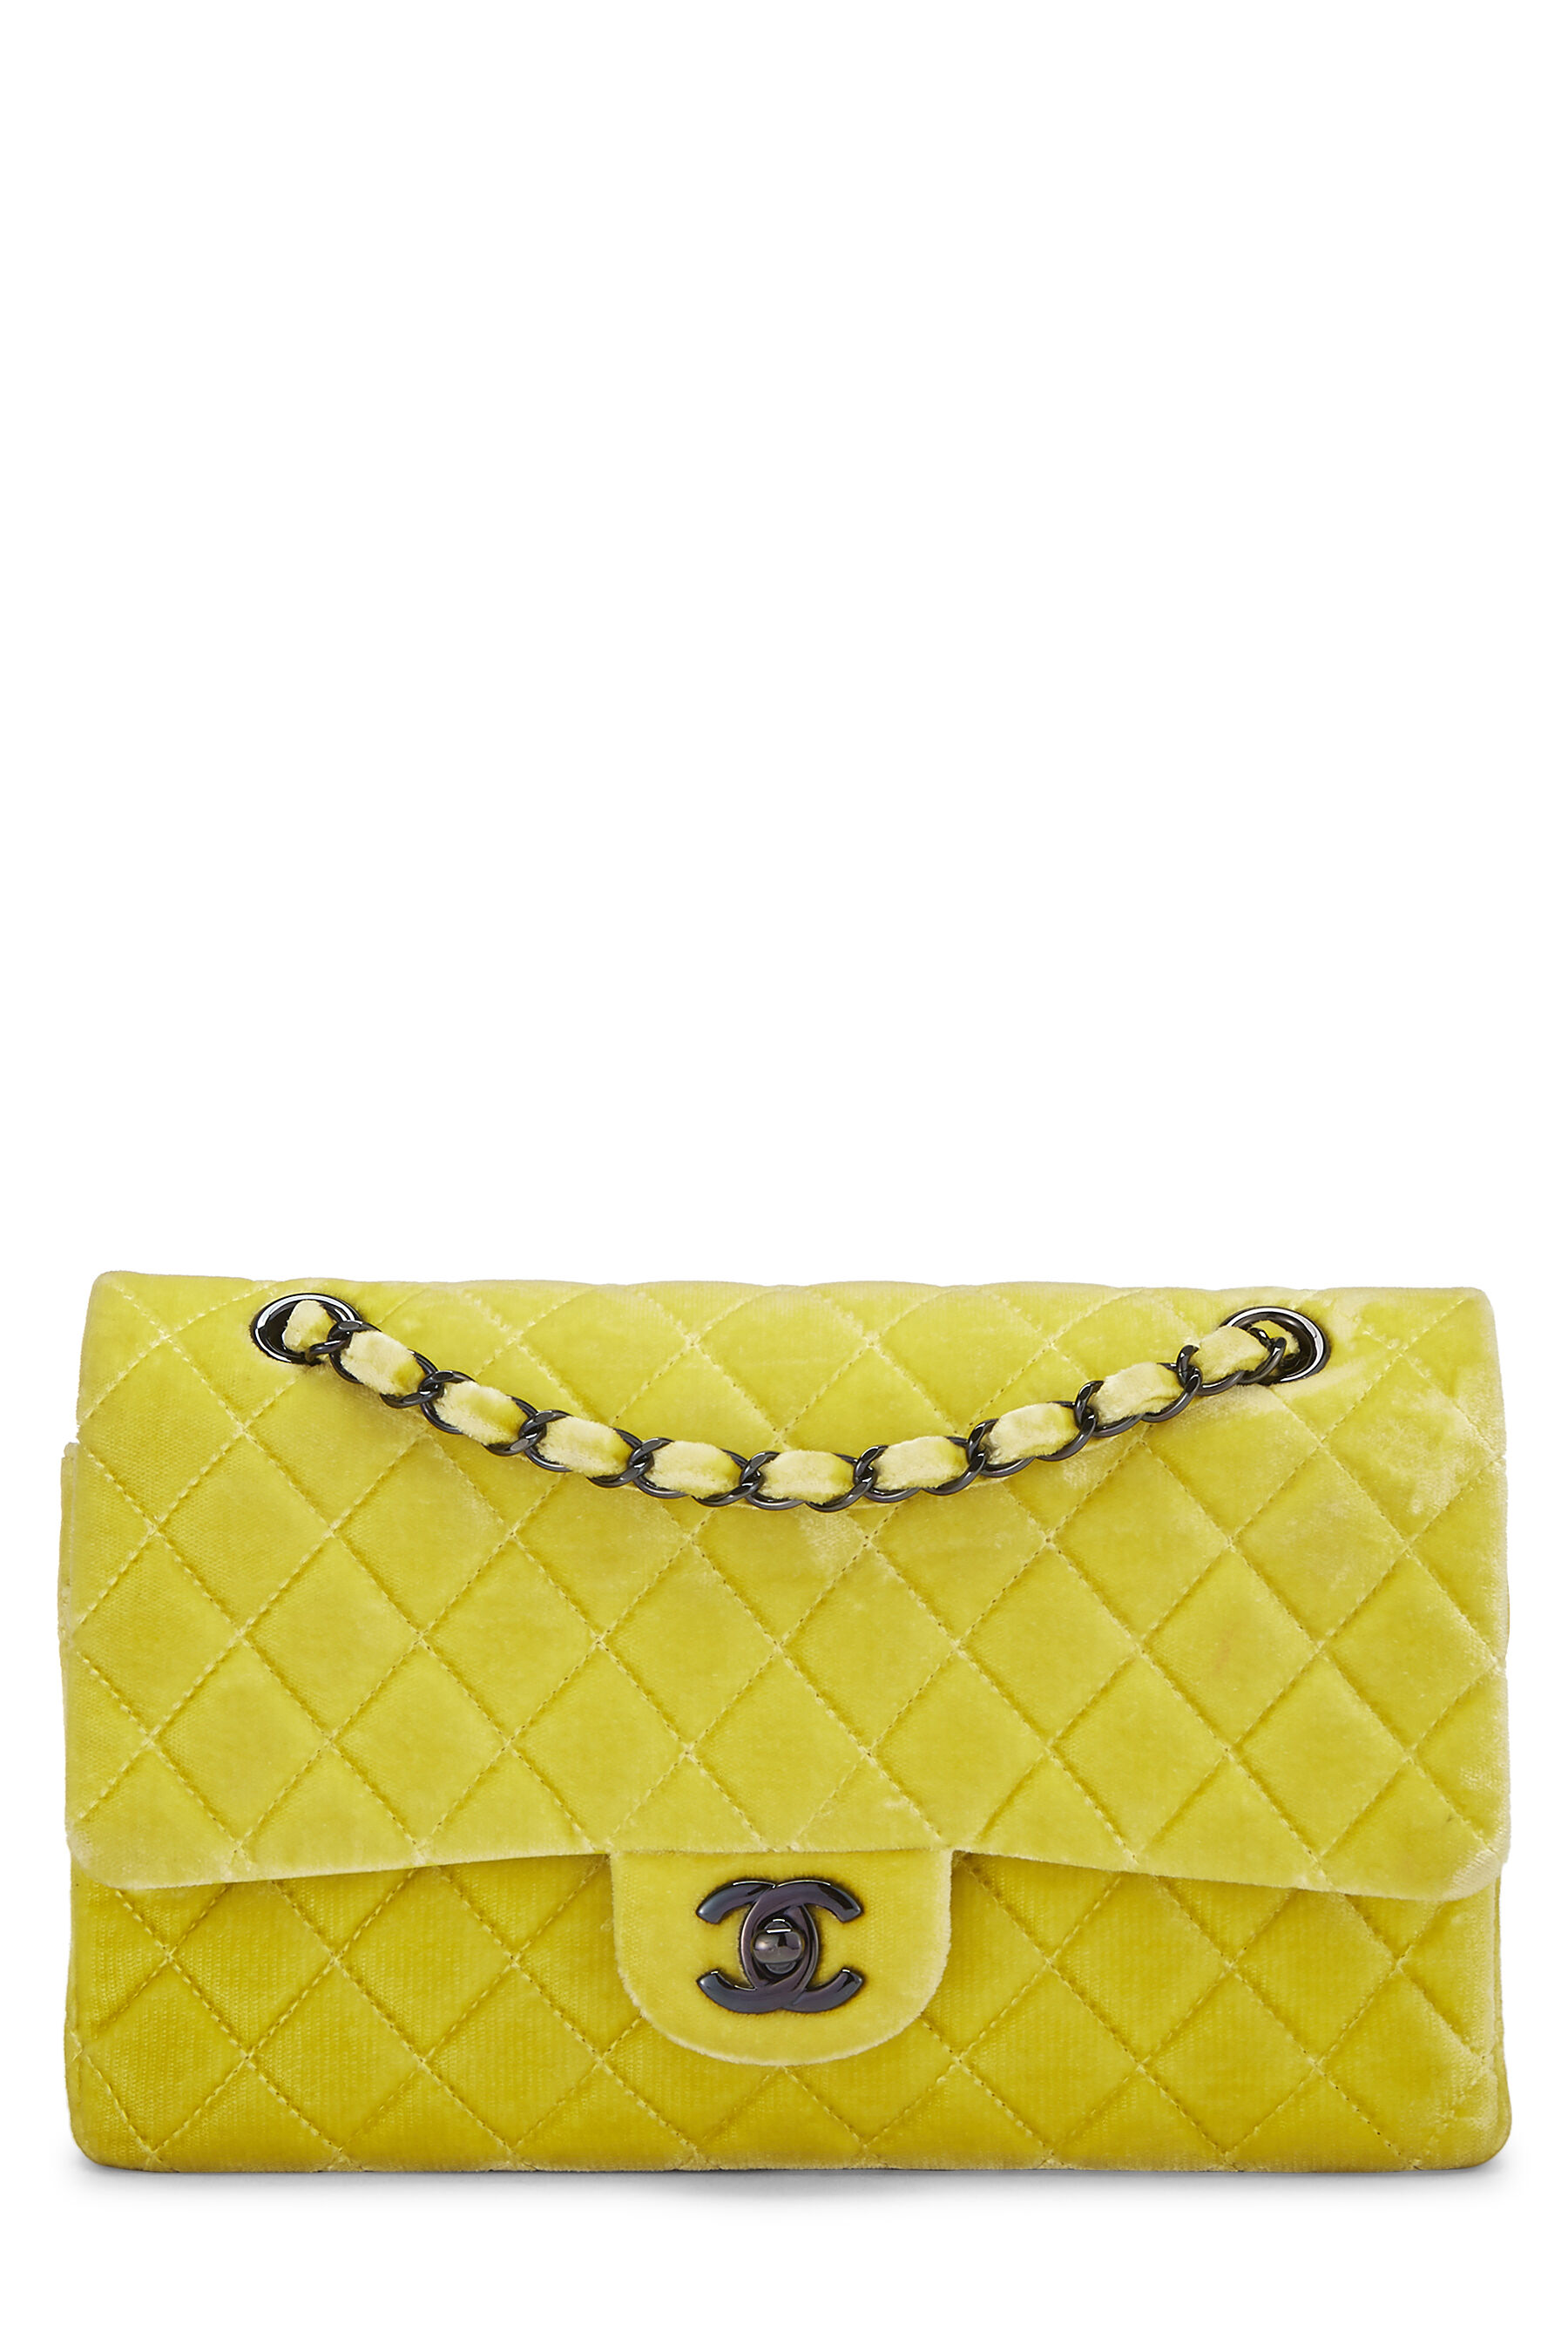 Chanel - Yellow Quilted Velvet Classic Double Flap Medium